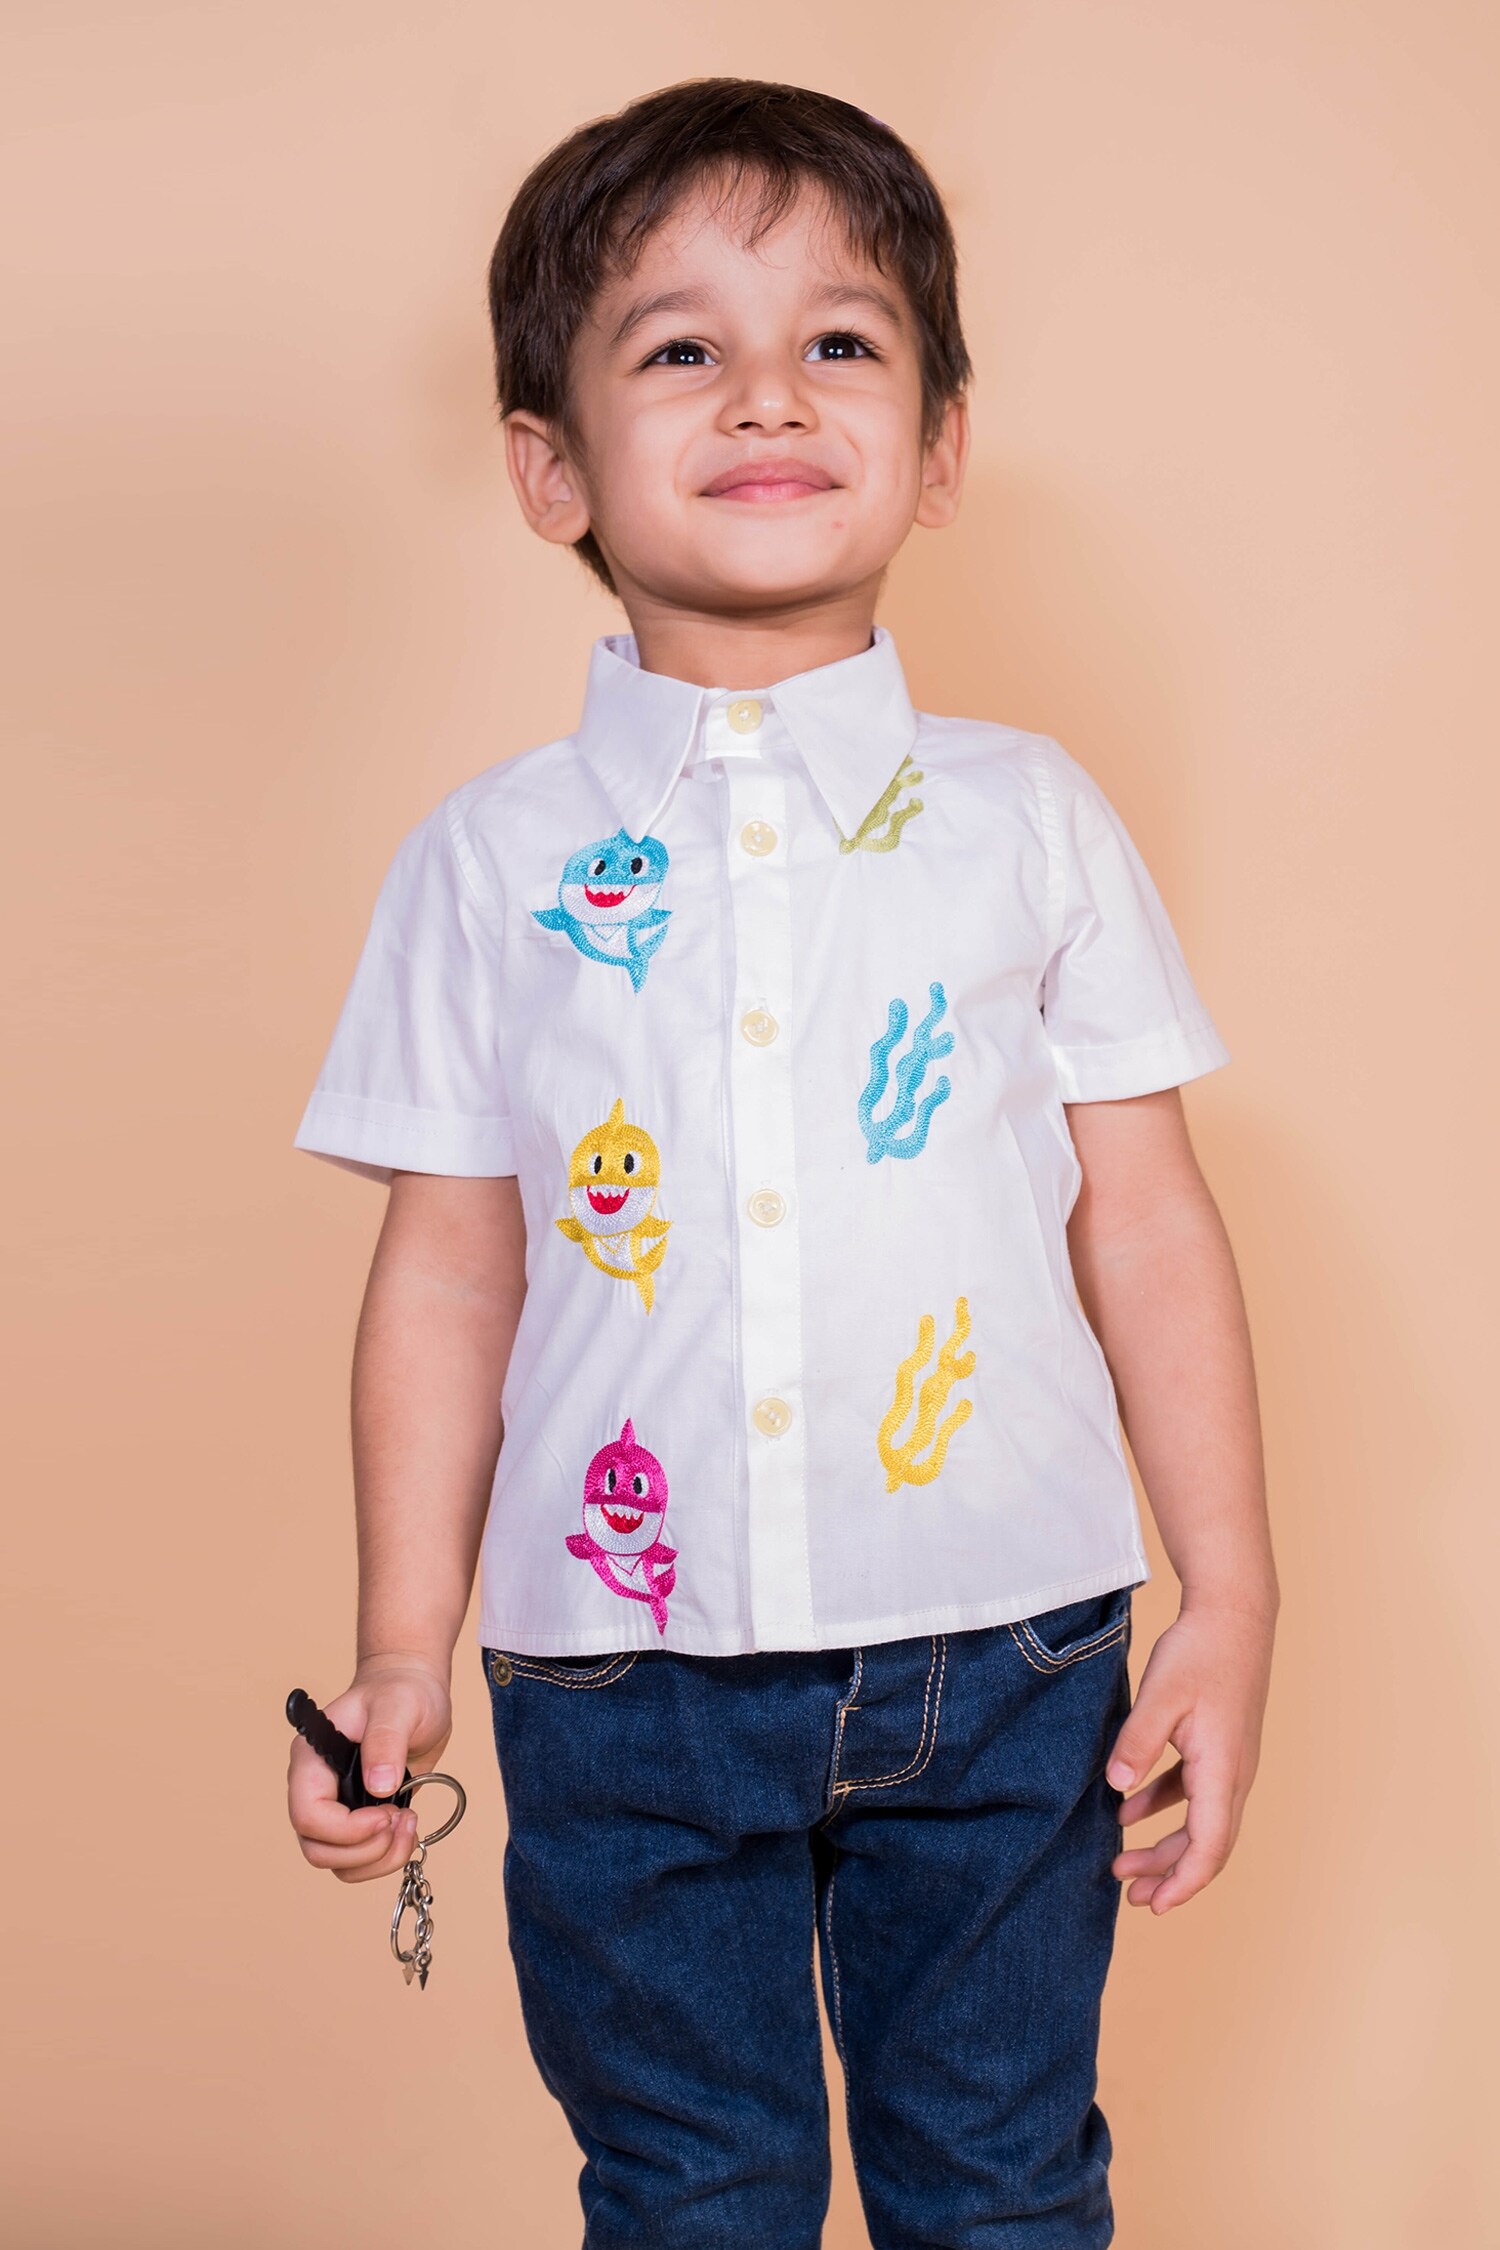 Toplove White Cotton Embroidery Baby Shark Shirt For Boys| Aza Fashions| Party